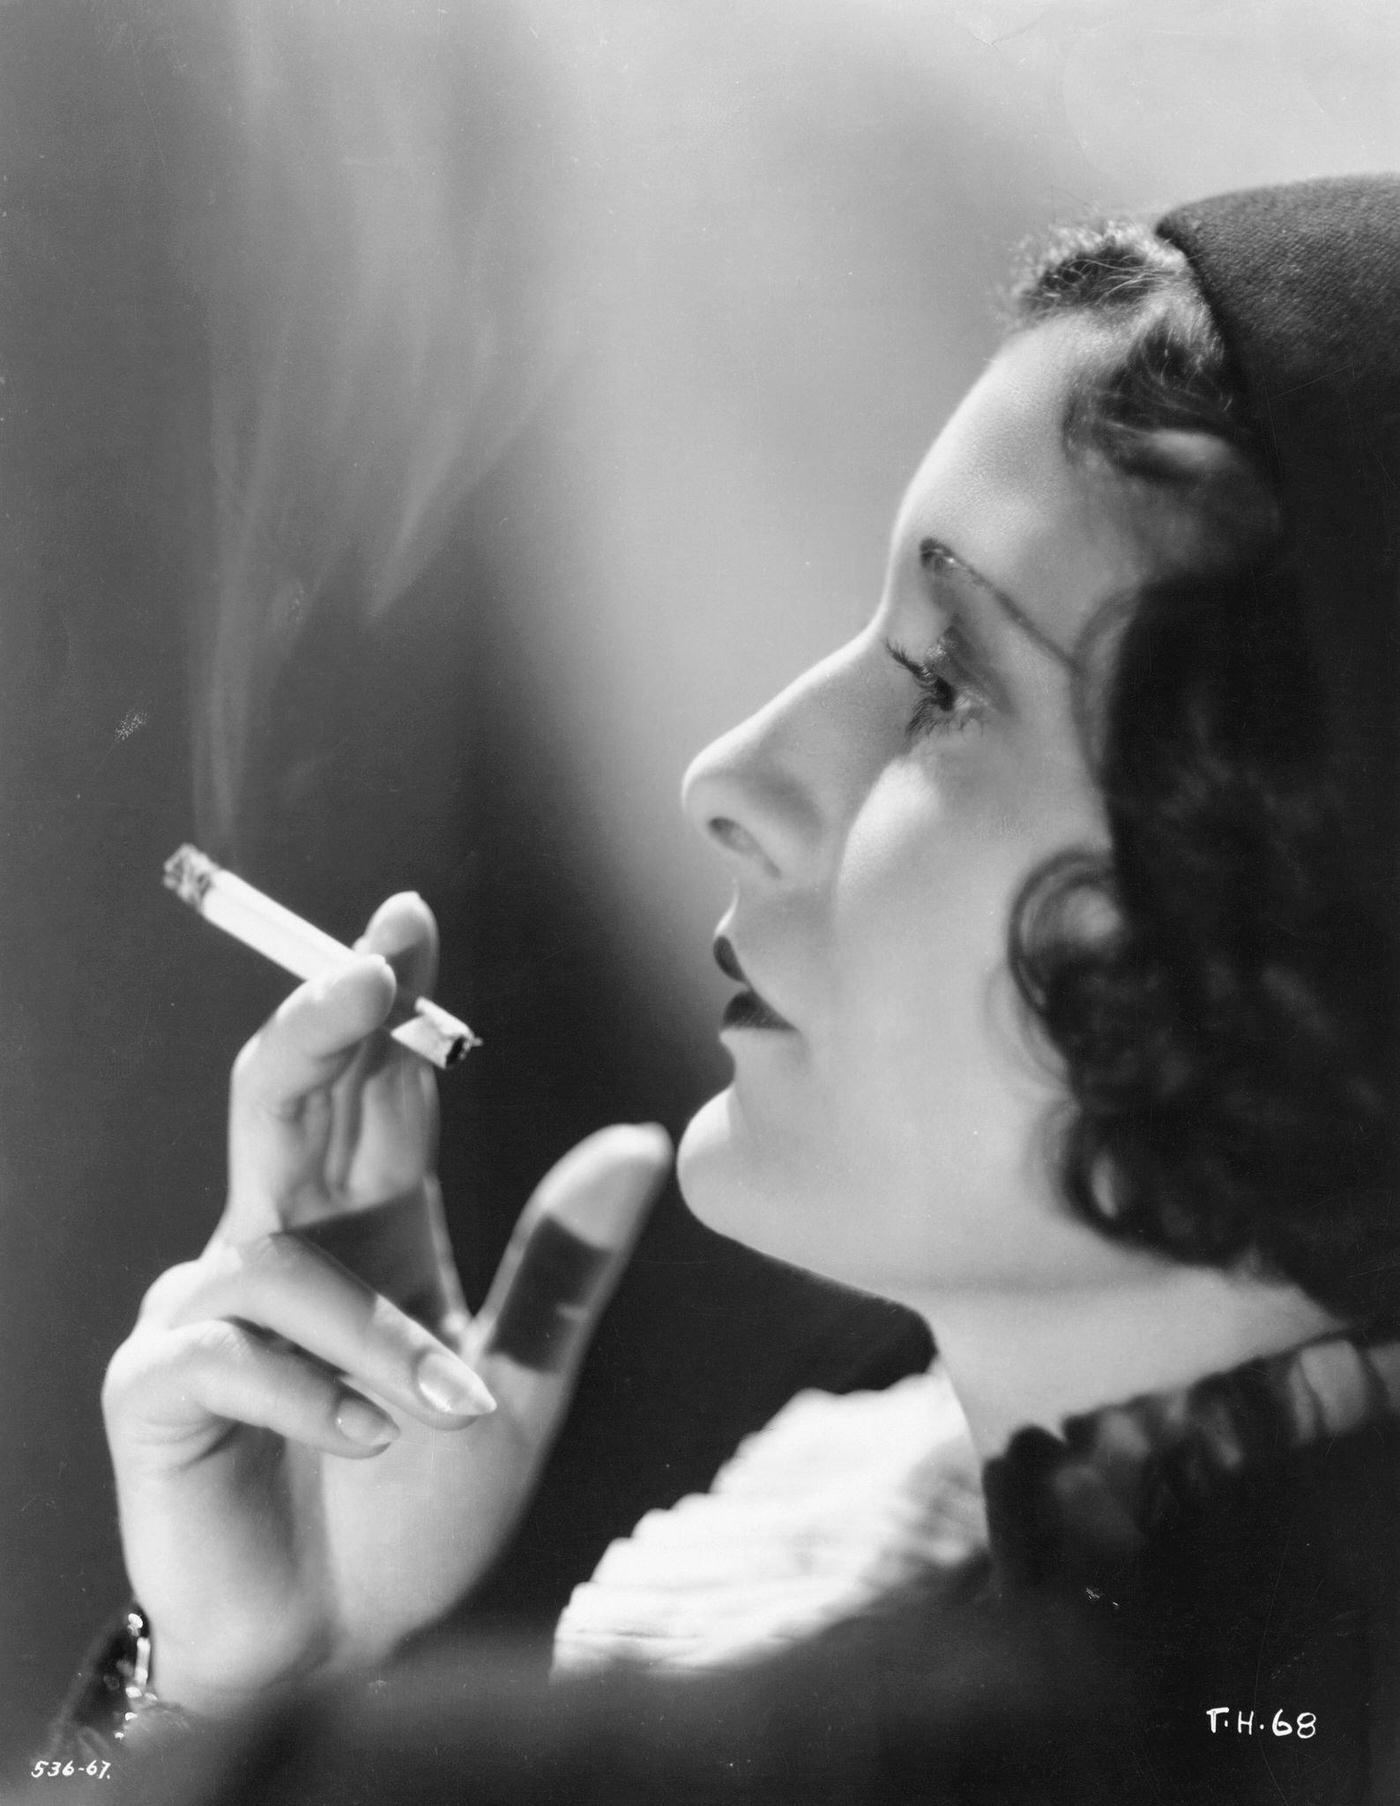 Actress Evelyn Brent playing the lead role of Ruby Smith in the comedic crime film Traveling Husbands, 1931.